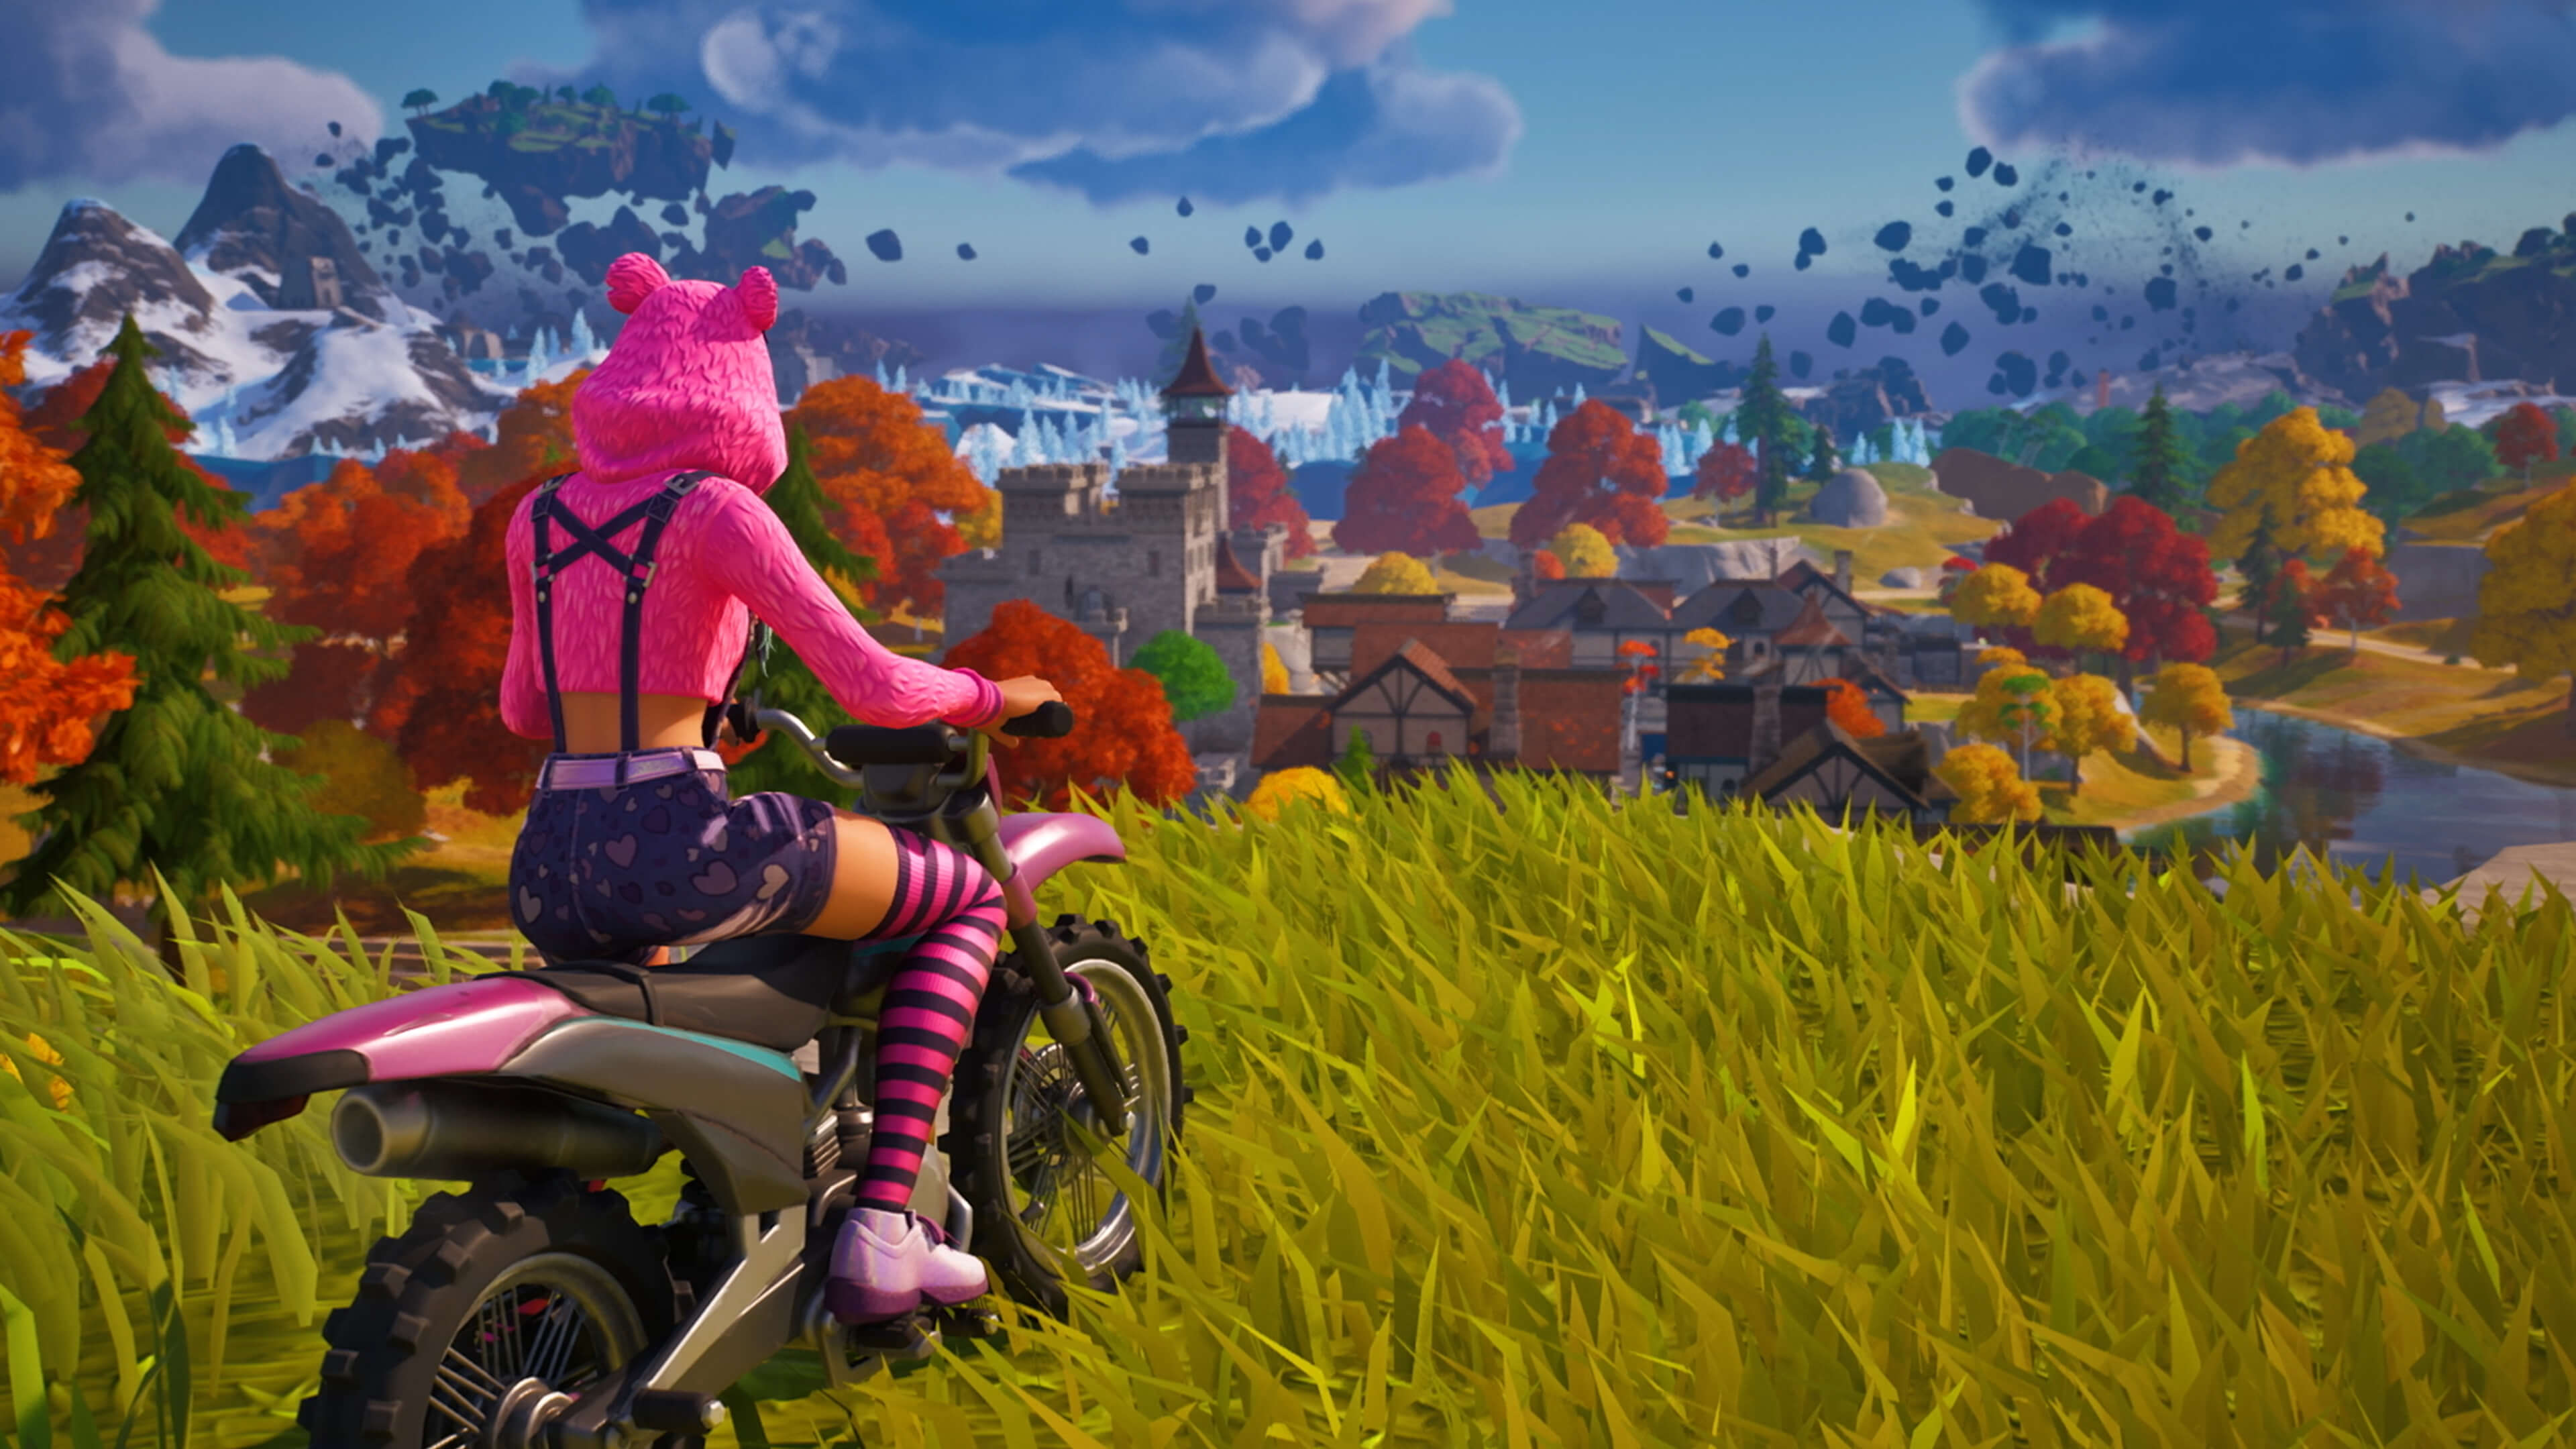 A Fortnite character in a pink fuzzy bear hoodie overlooks a town while atop a motorcycle